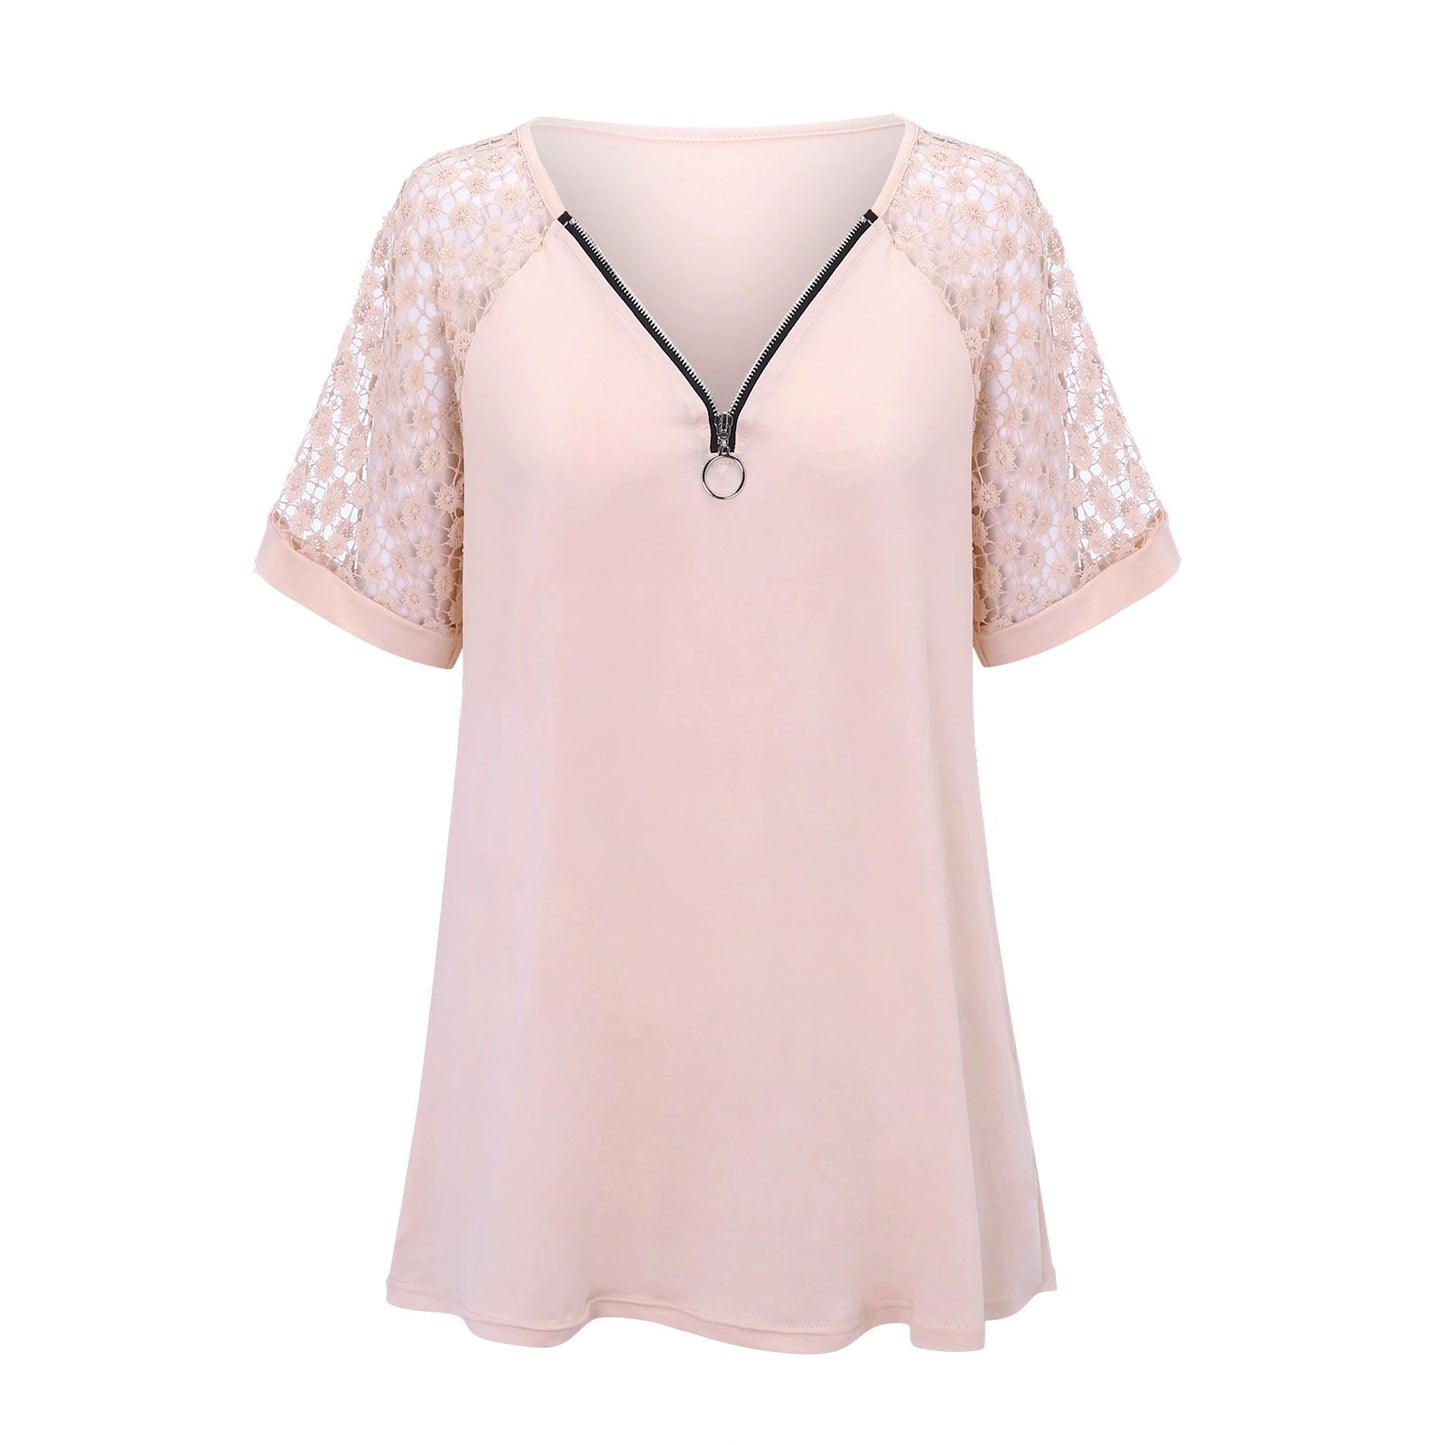 2023 NEW FASHION CASUAL LACE TOPS PATCHWORK SUMMER V-NECK HOLLOW OUT T-SHIRT